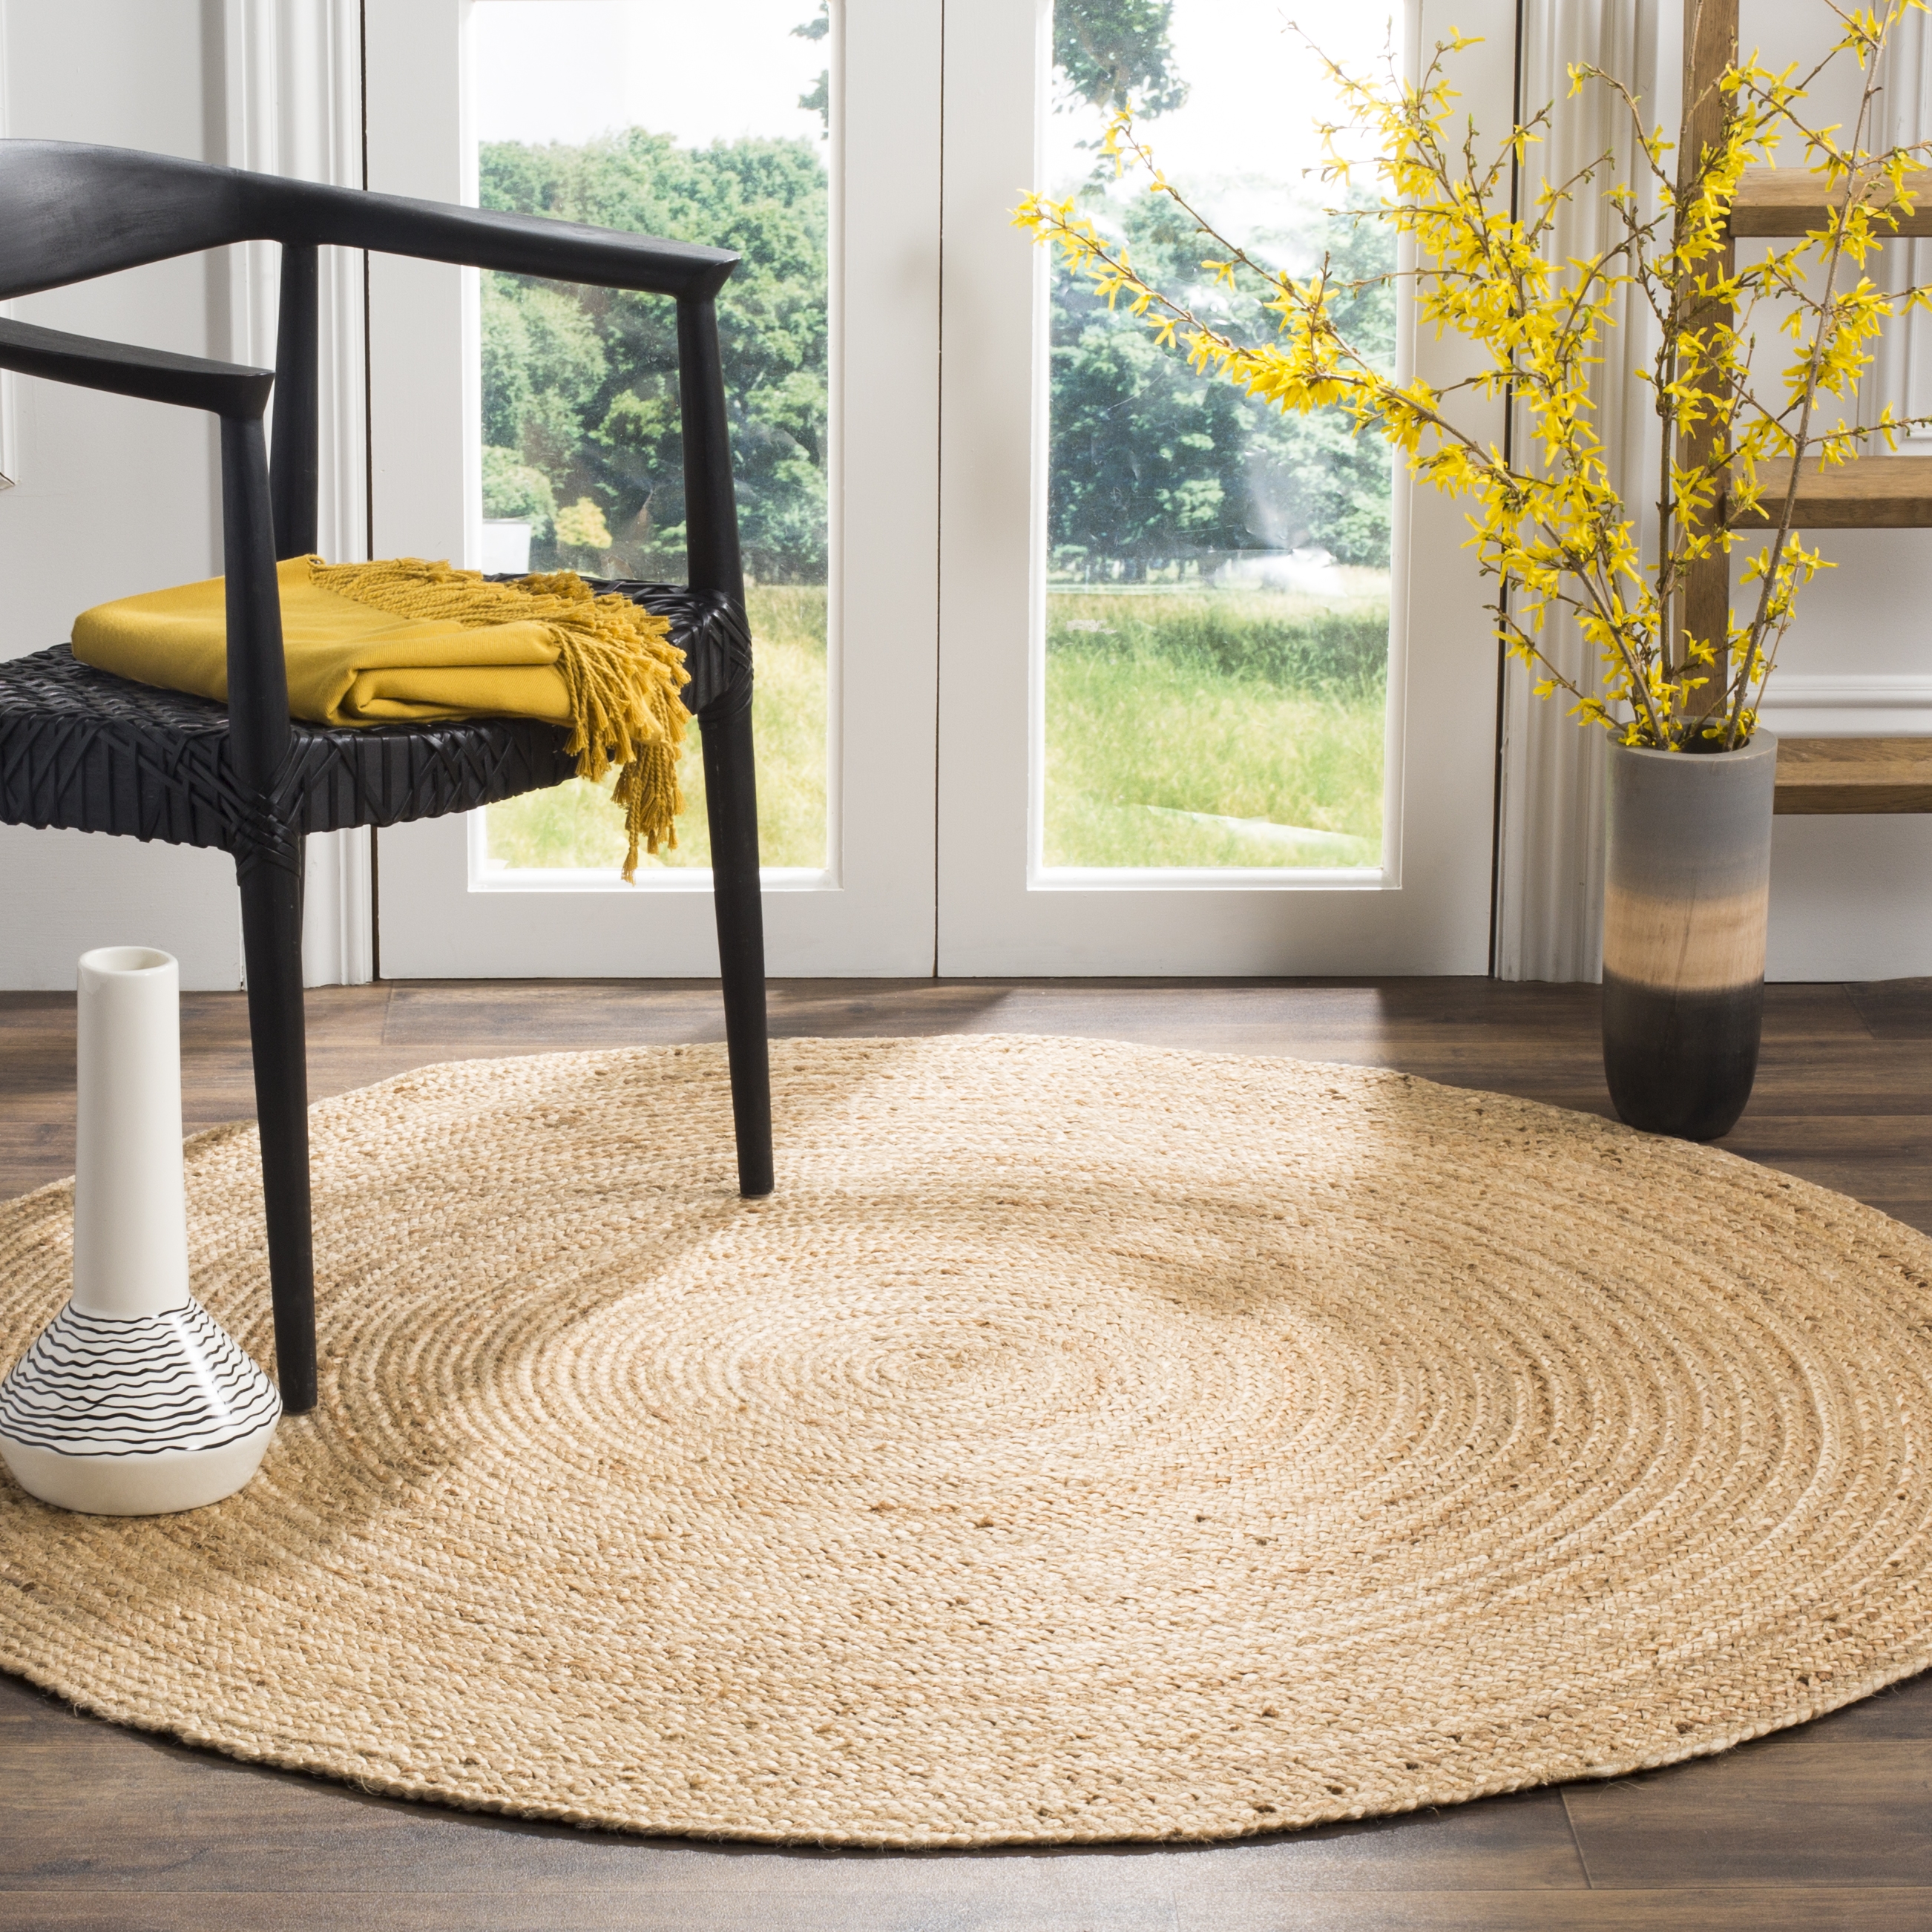 Arlo Home Hand Woven Area Rug, NF801N, Natural/Natural,  8' X 8' Round - Image 1